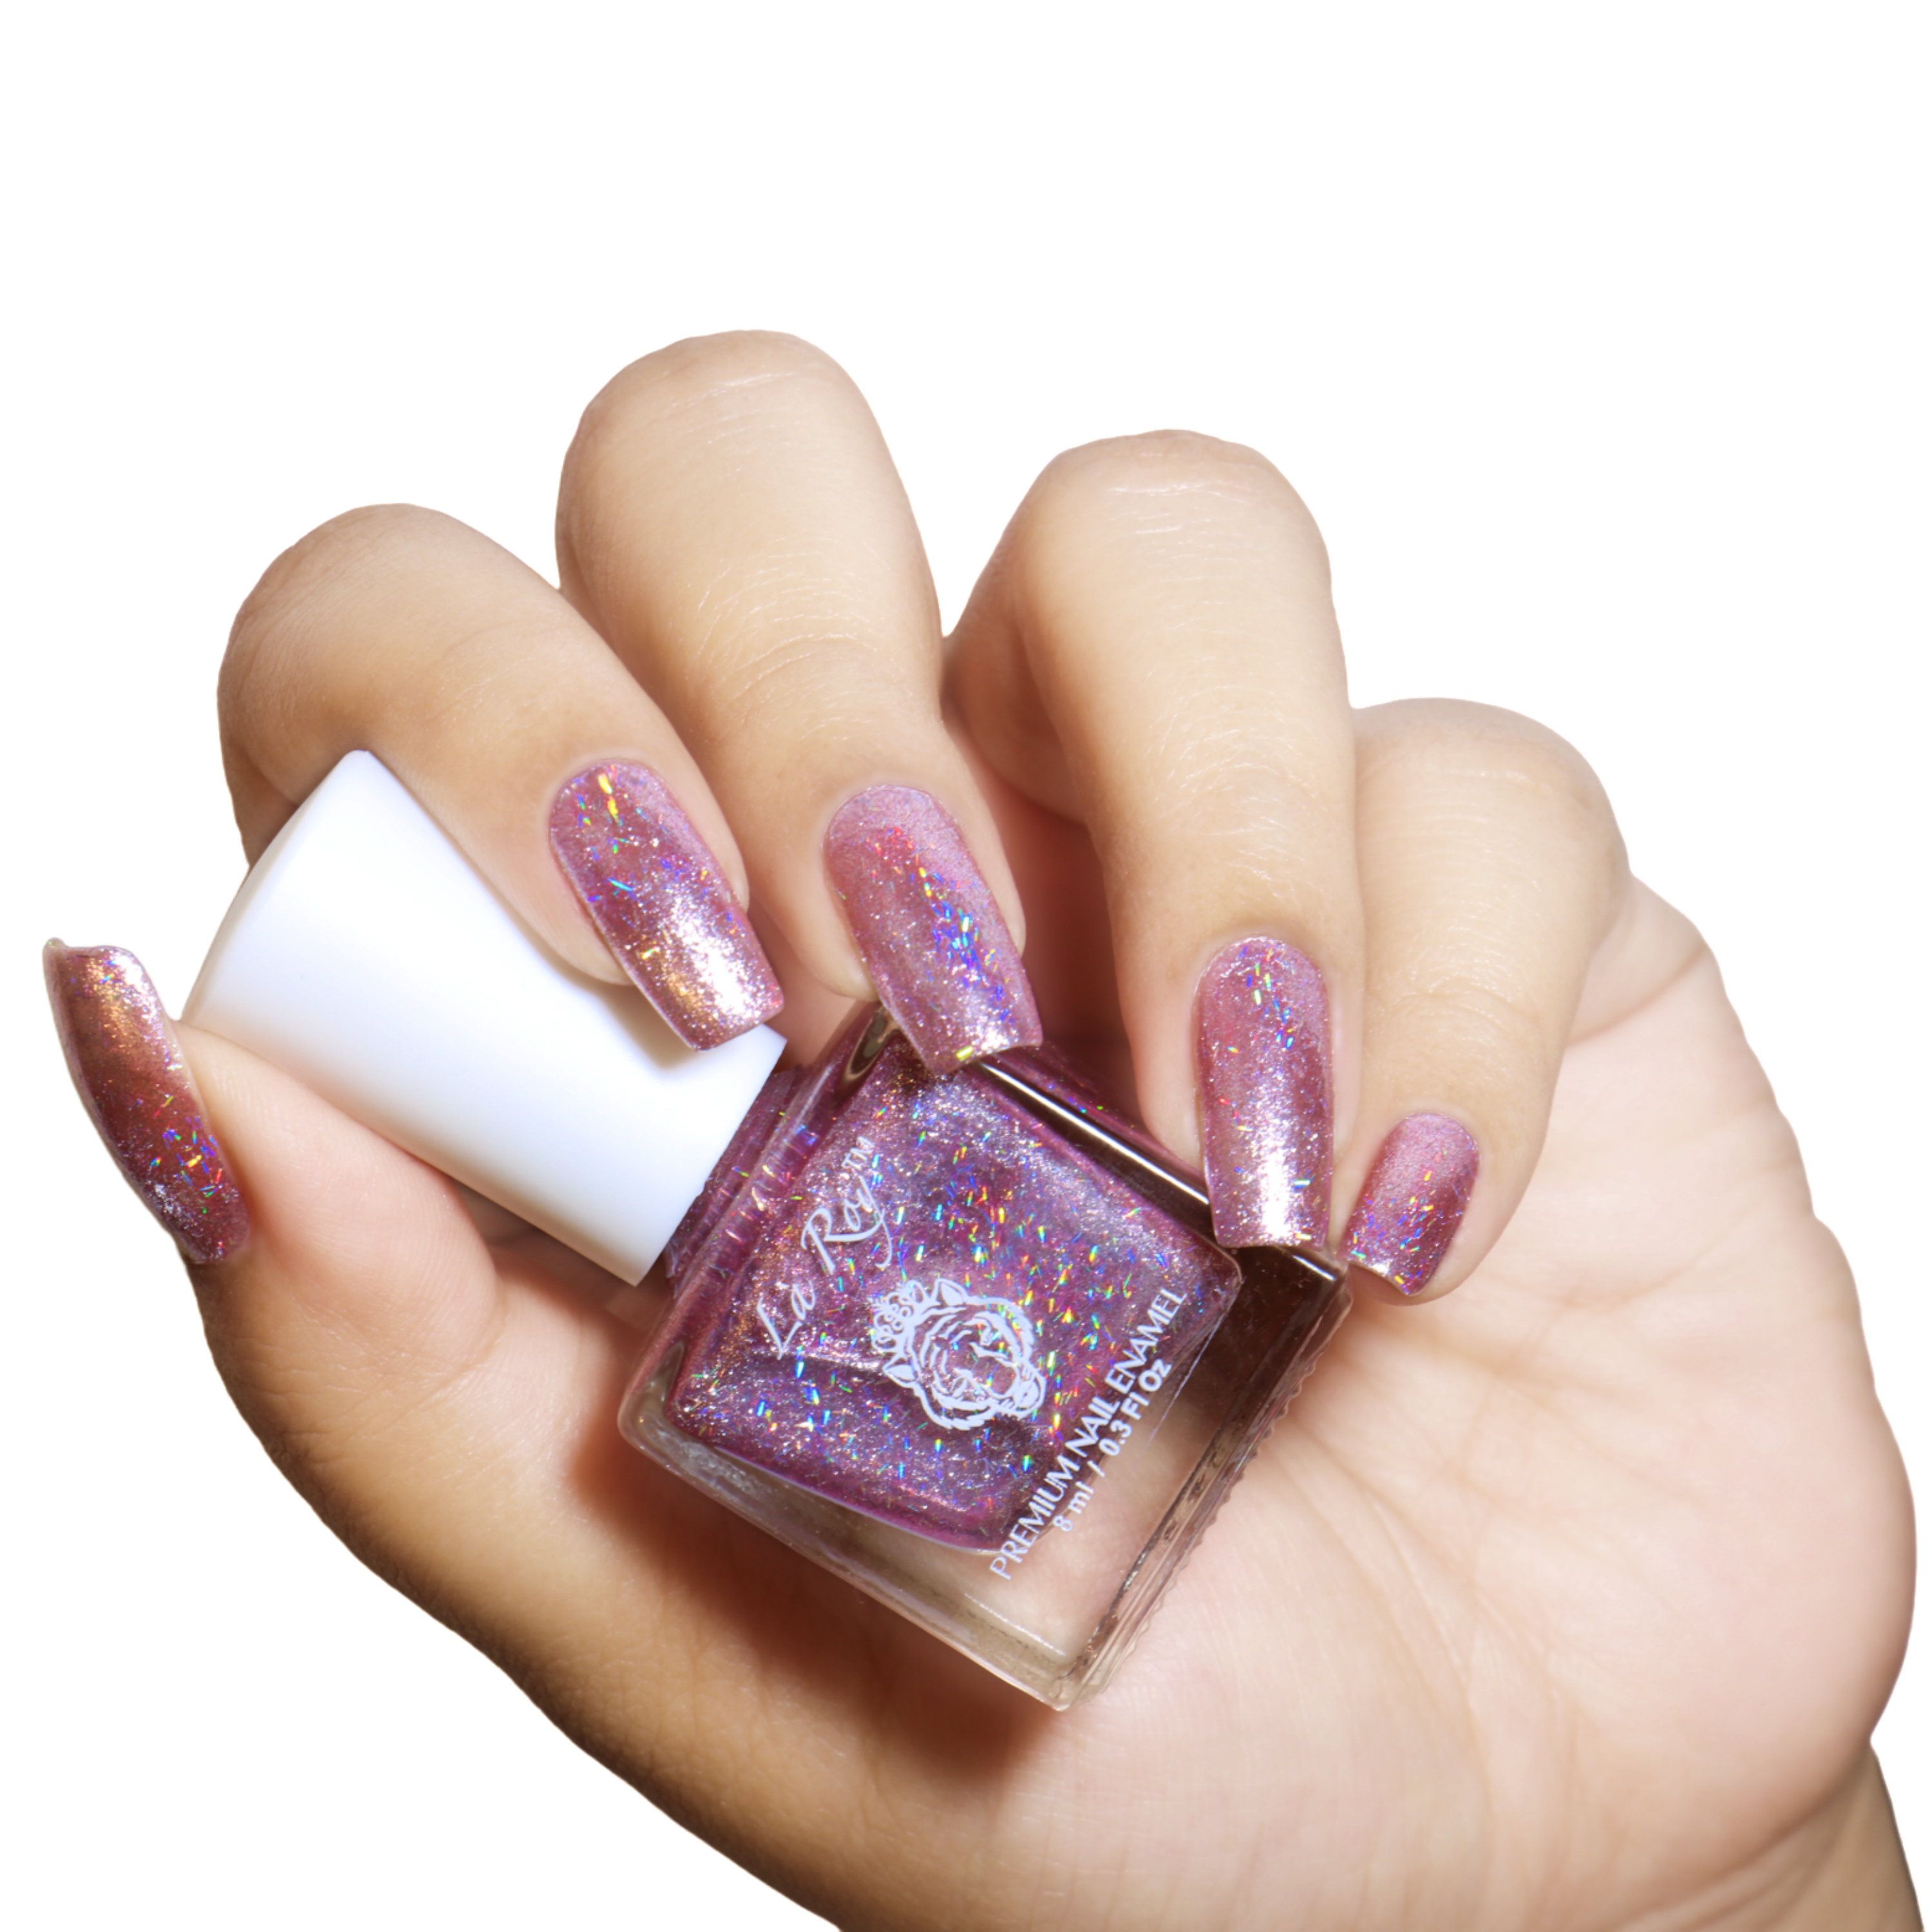 Introducing essie gel couture nail polish, a revolutionary, new long-wear  line